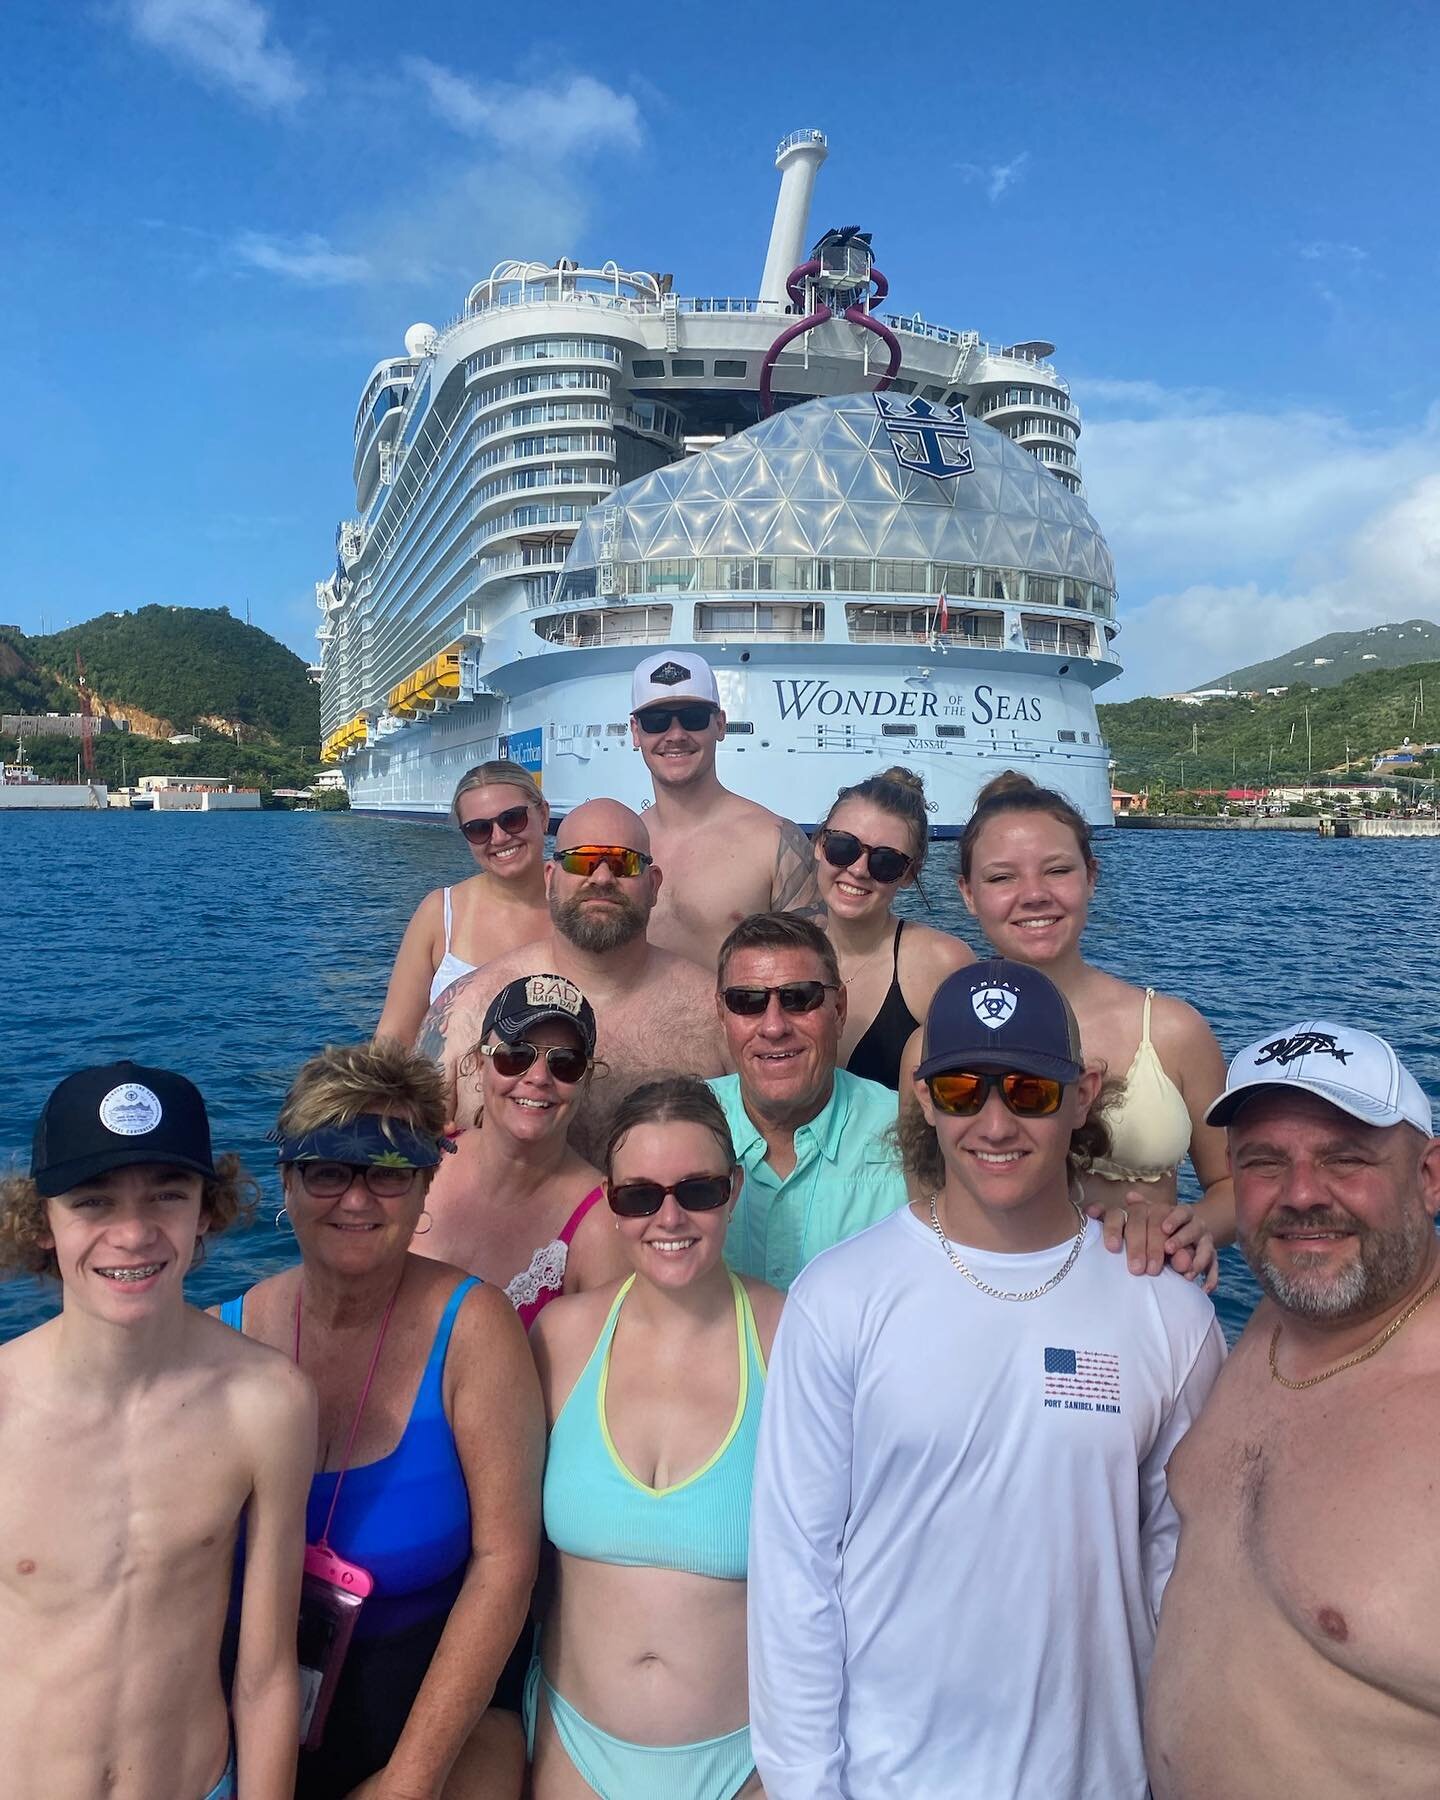 Had a great time with our cruise ships guests from Norwegian of the seas 
Alibi Boat Charters 

.
#virginislands #stjohn #stthomas#stjohn#BVI#beaches#disney#cruise#beachlife #kiteboarding #yoga #charterboats #boatrentalas #freediving #adventurelife #